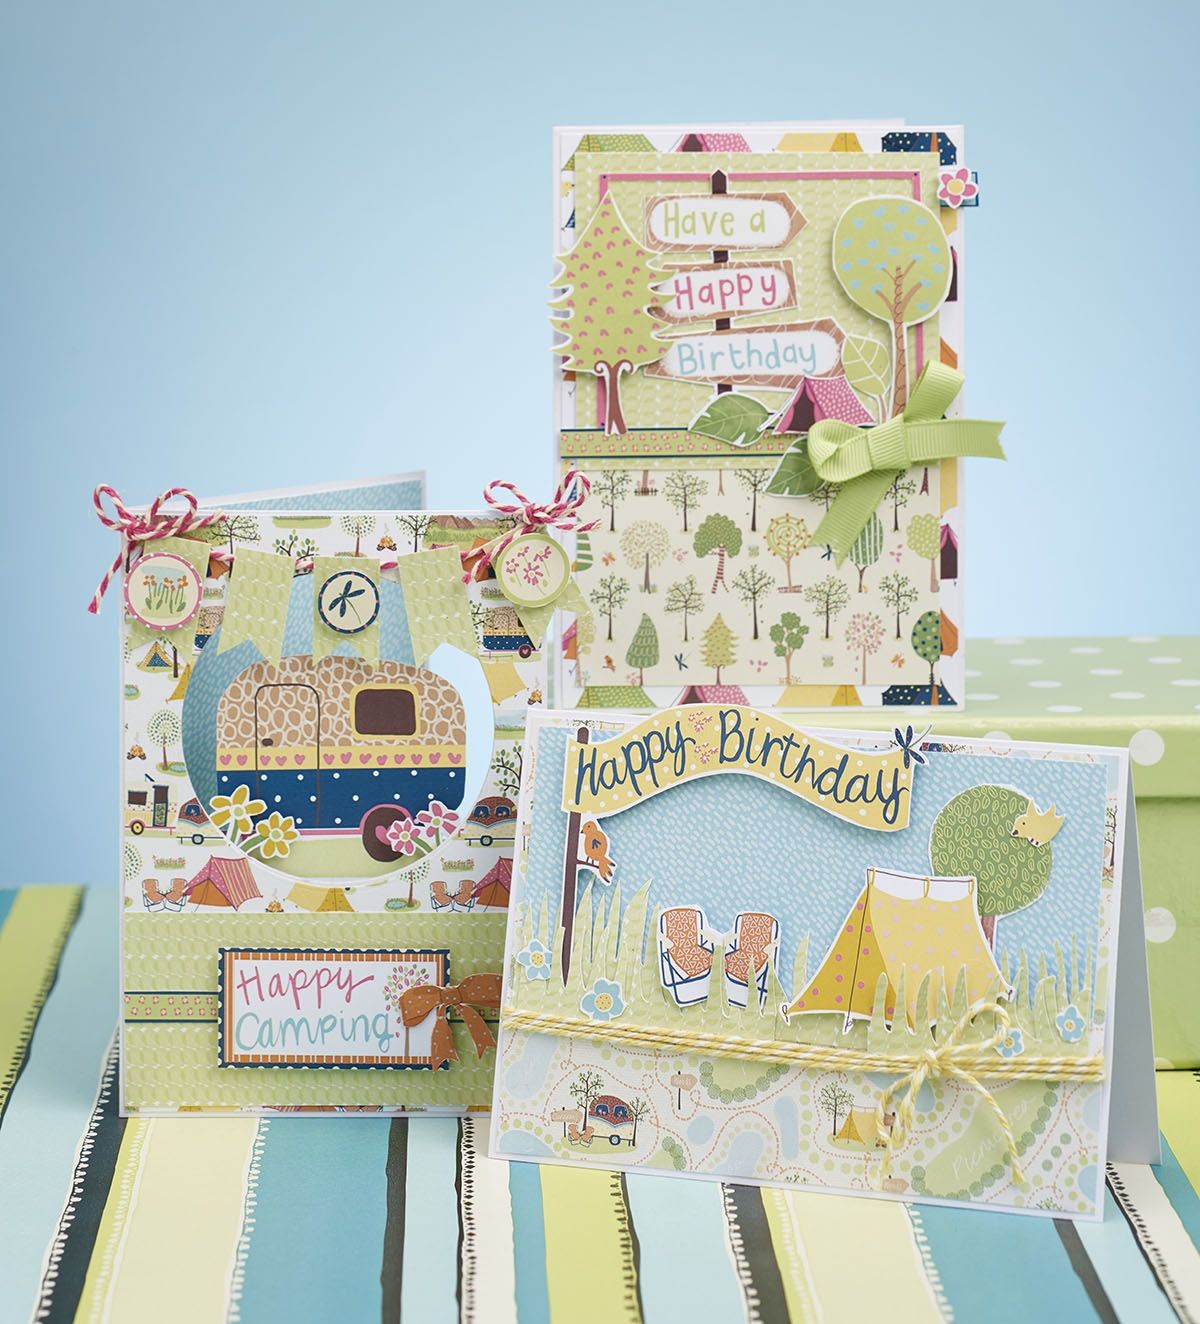 Cute Papercraft Pitch Up and Make some Adorable Cards with these Fantastic Cute